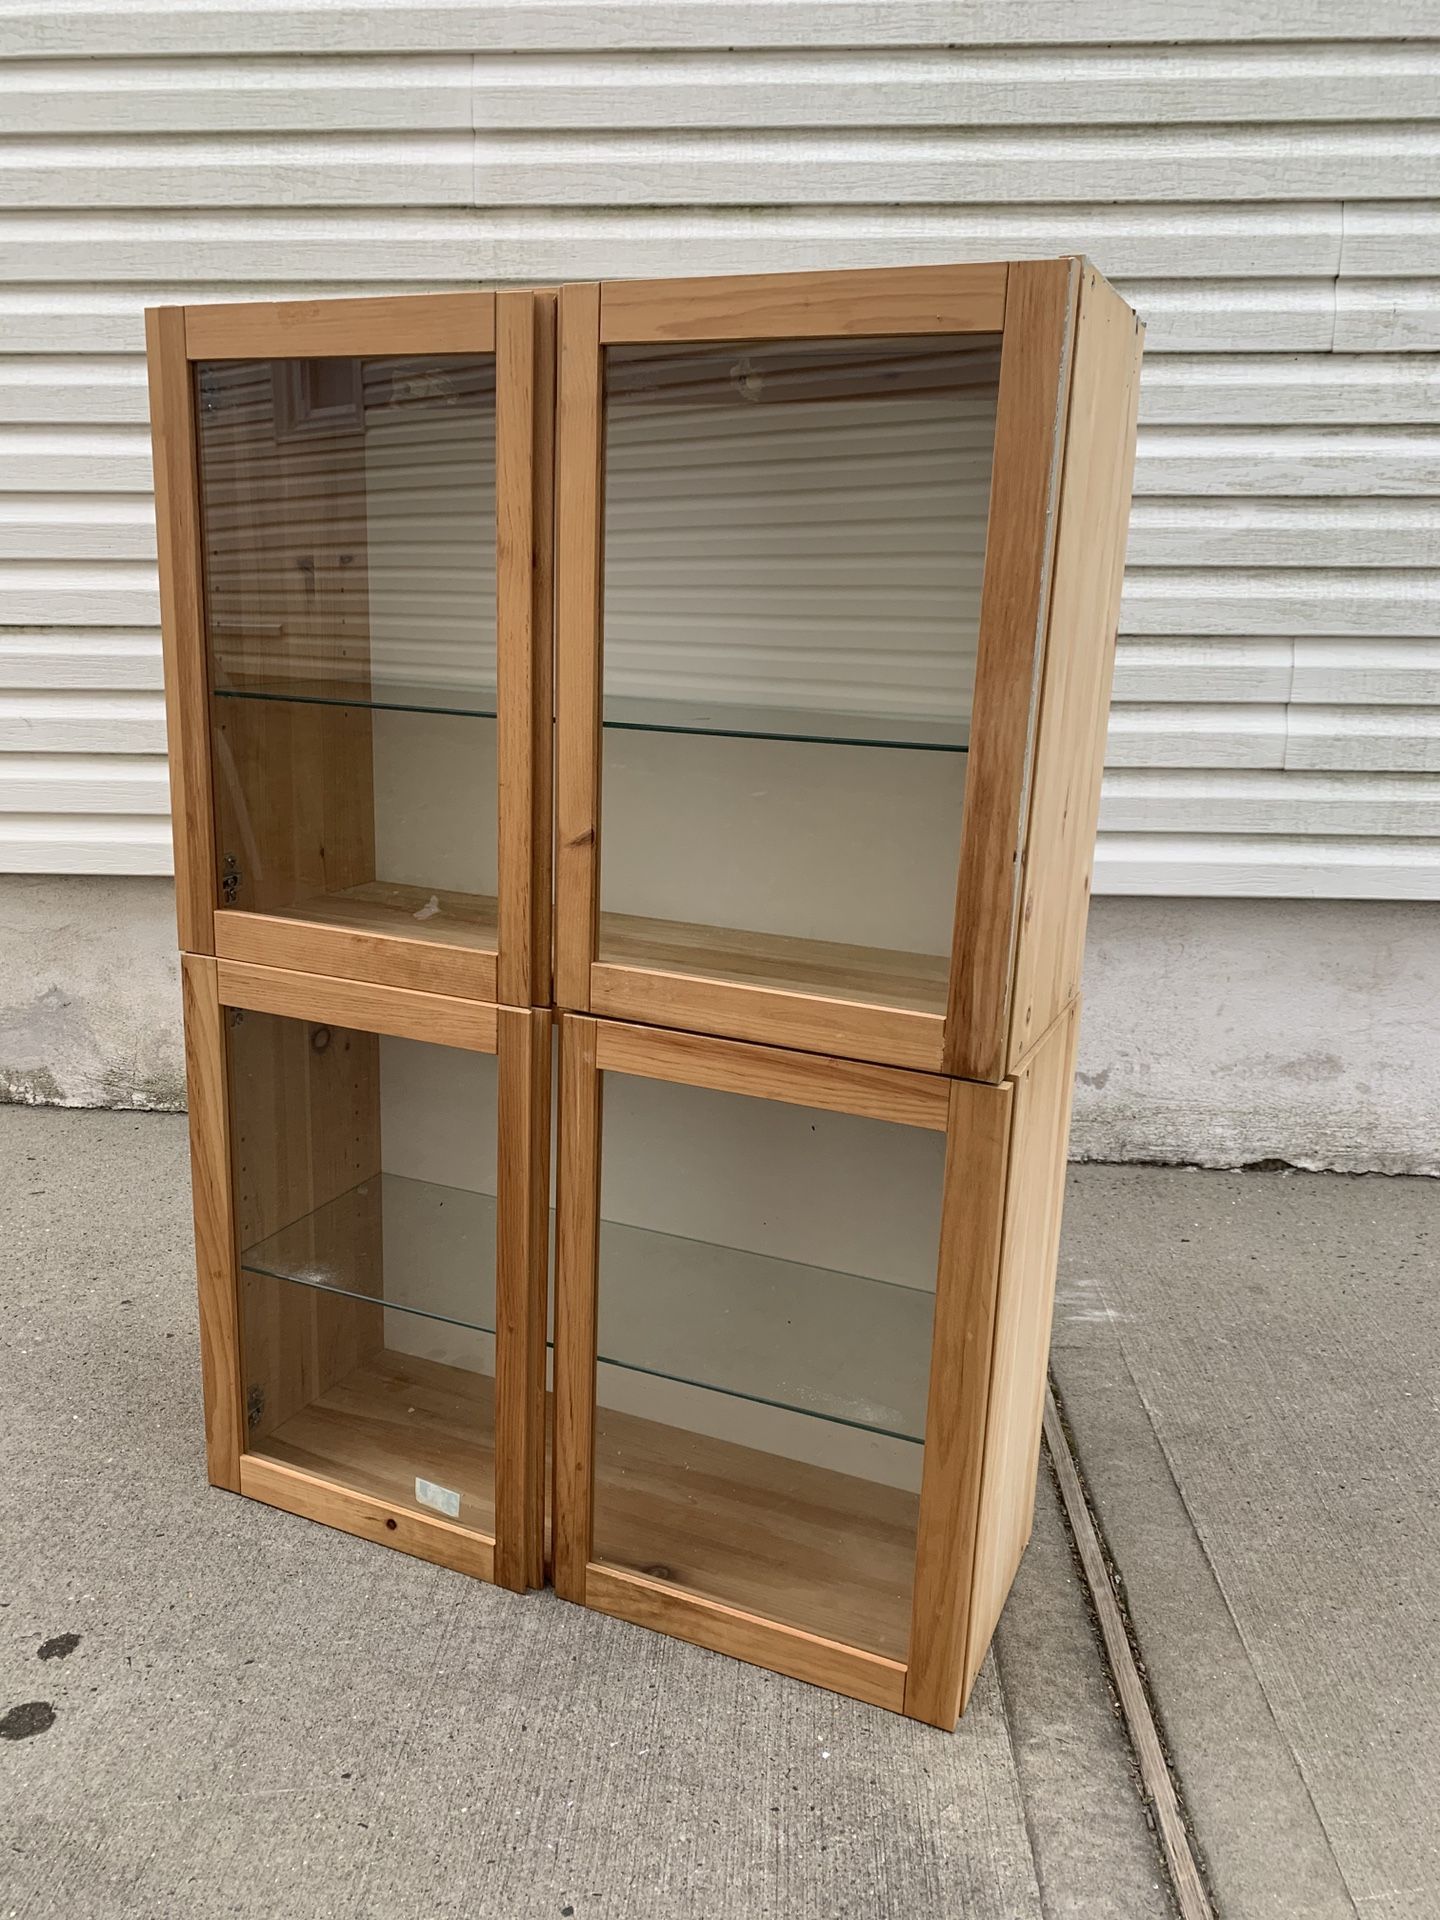 Cabinet for bathroom or kitchen